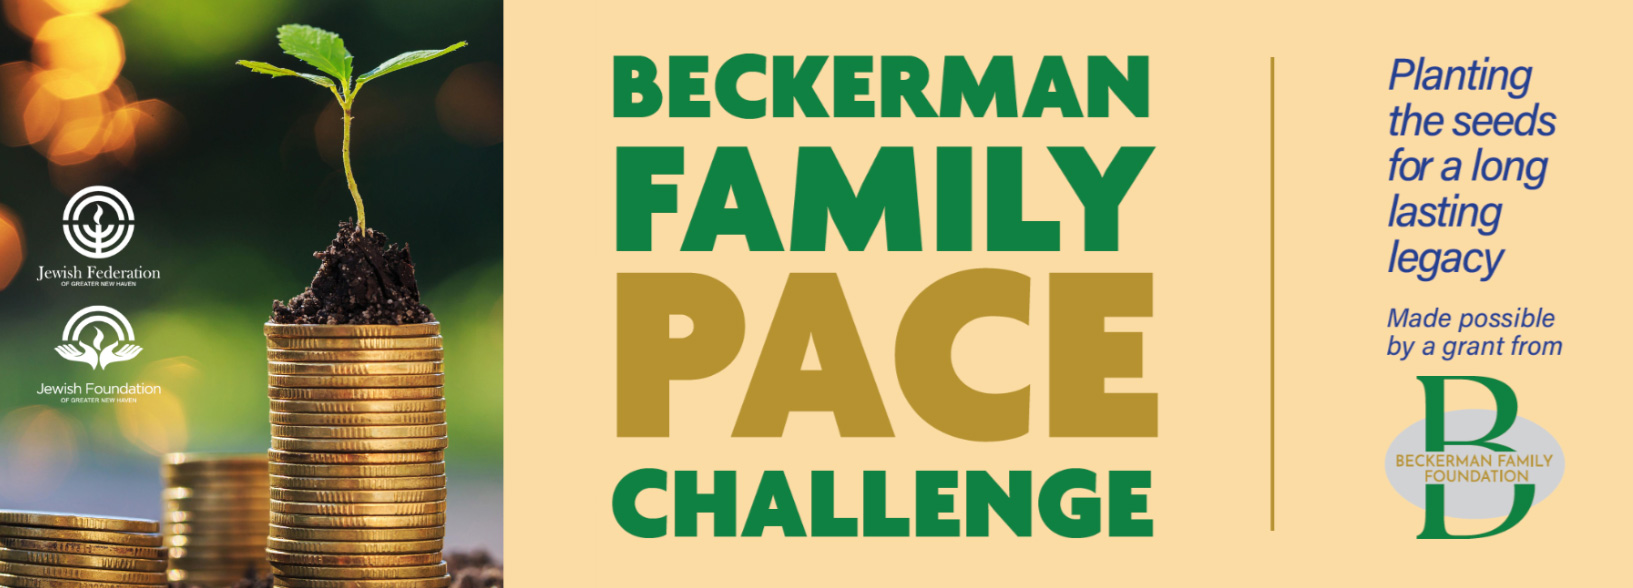 Beckerman Family PACE Challenge